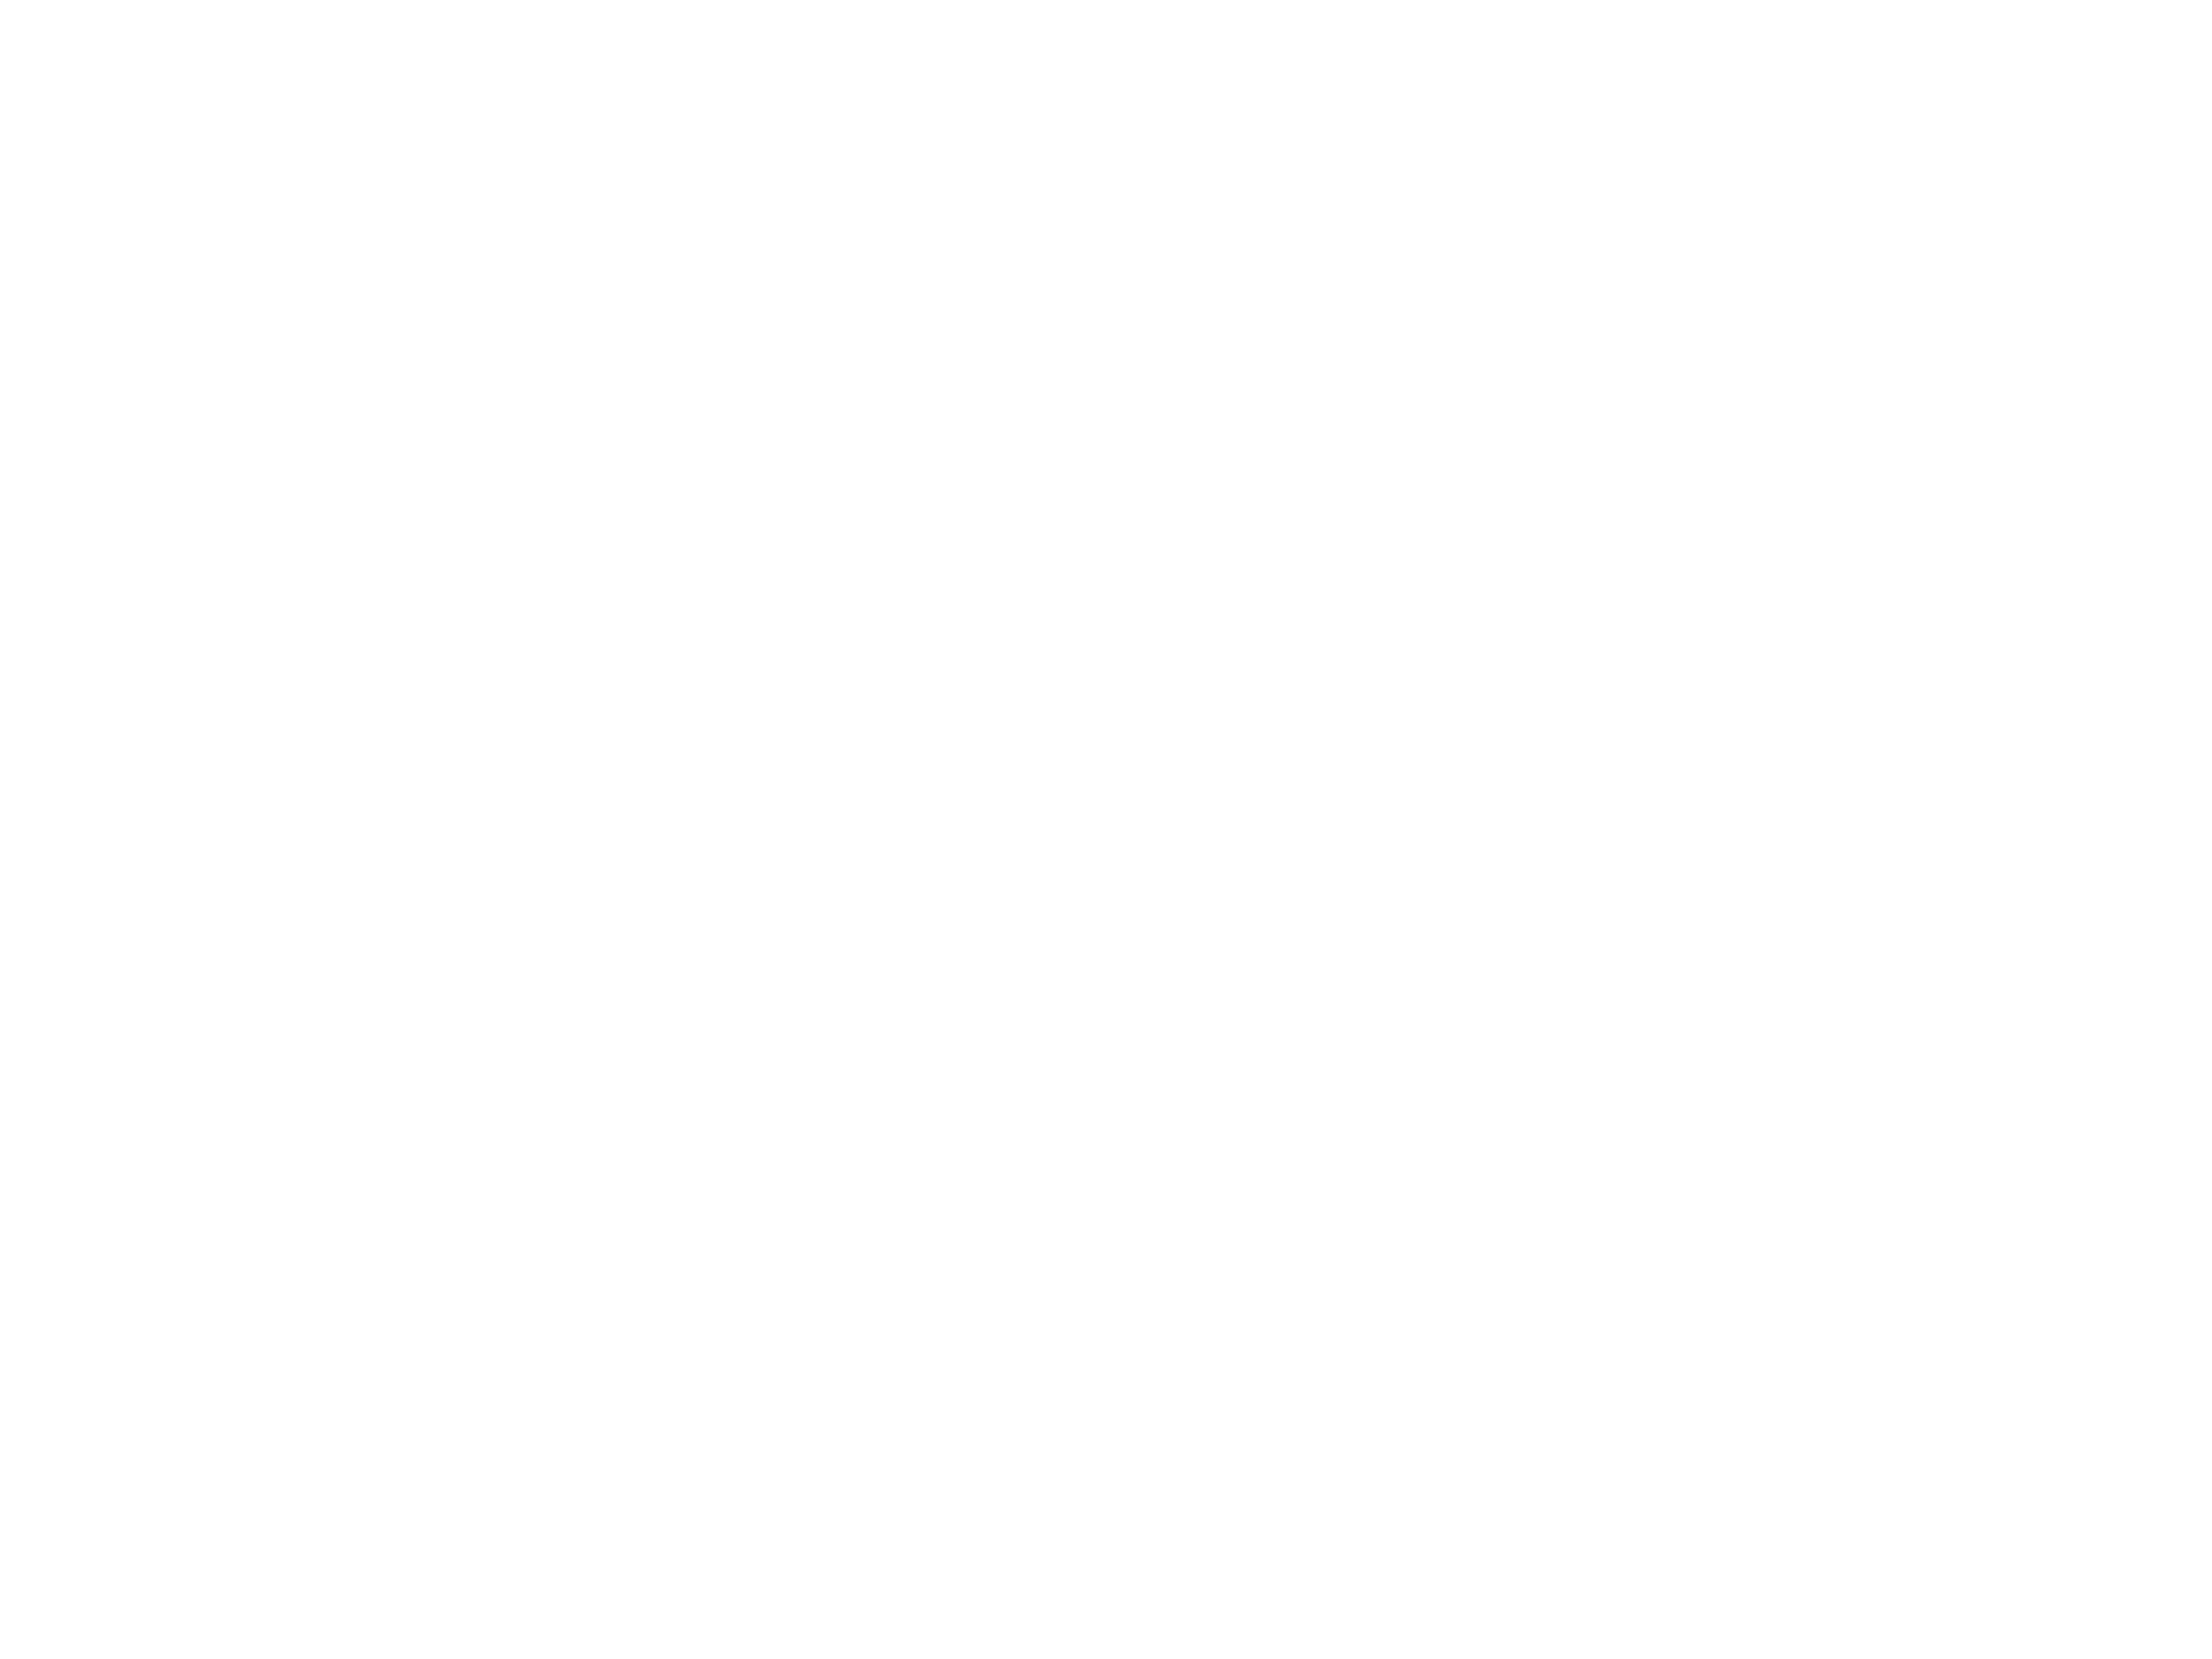 Cannes Lions award logo „#4 Best Agencies of the decade“, white lettering on black background